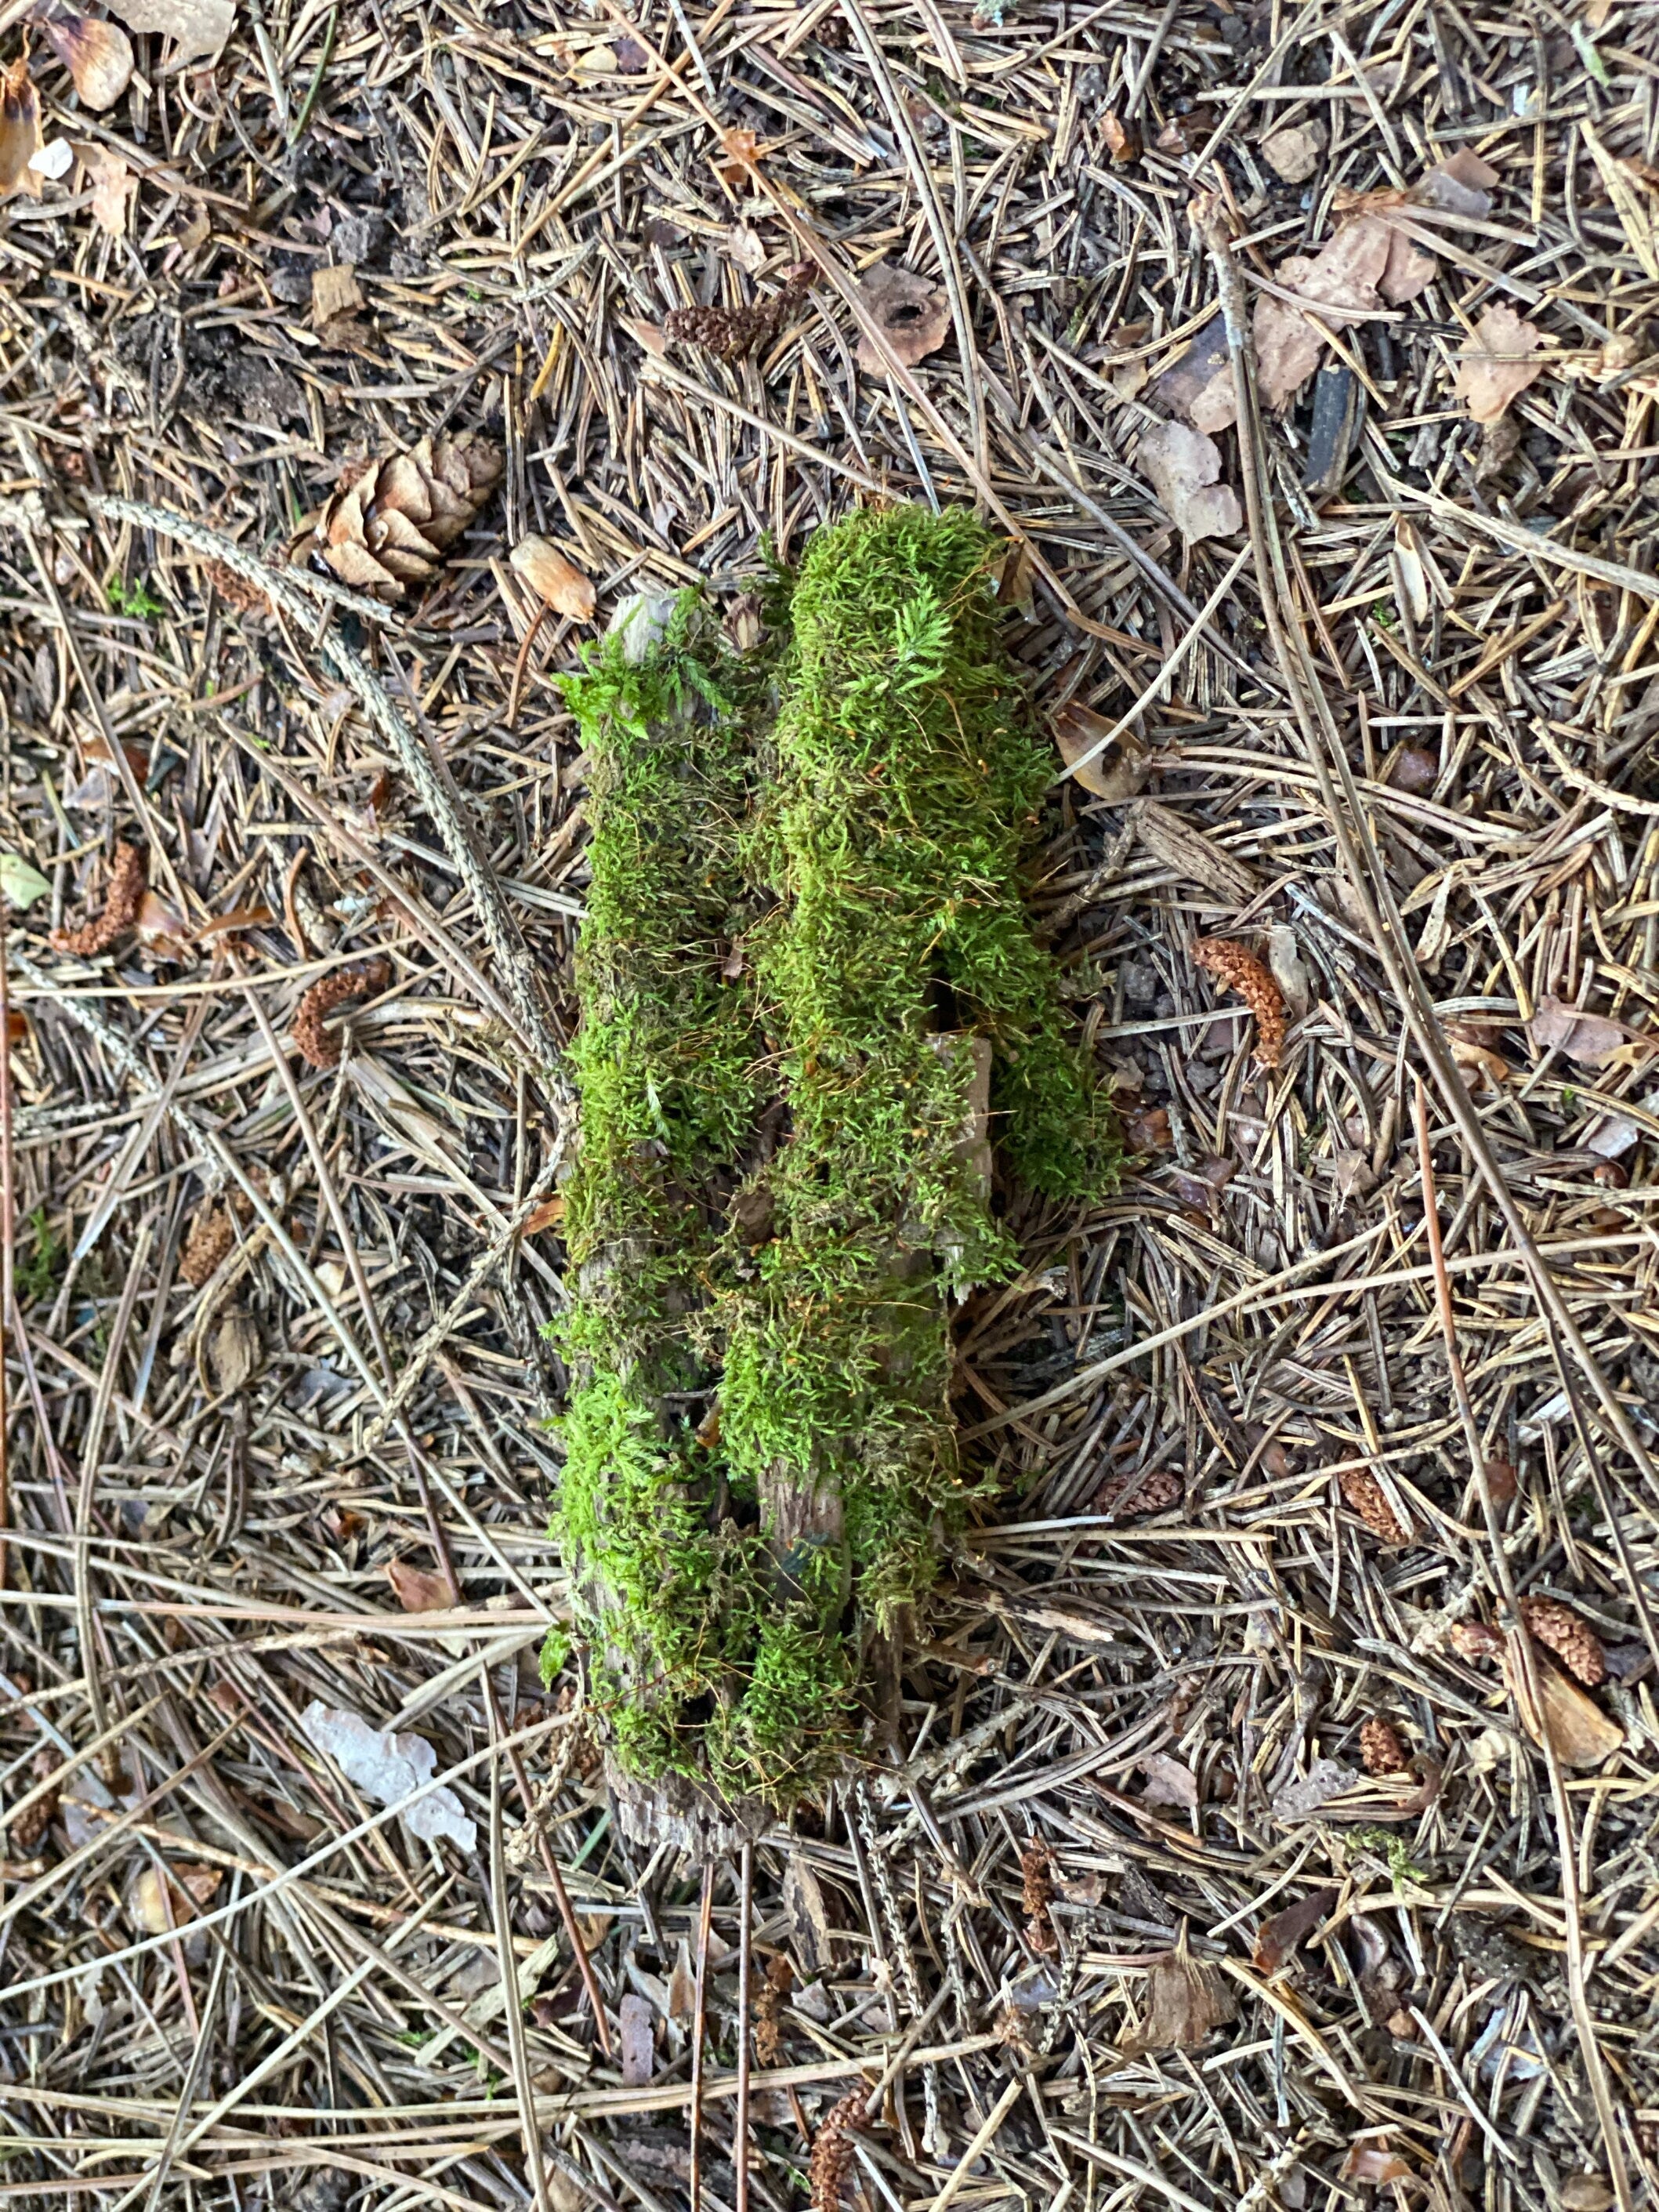 Tiny Moss Covered Log, Mossy Log, Approximately 5 Inches Long by 2 Inches Wide and 1 Inch High